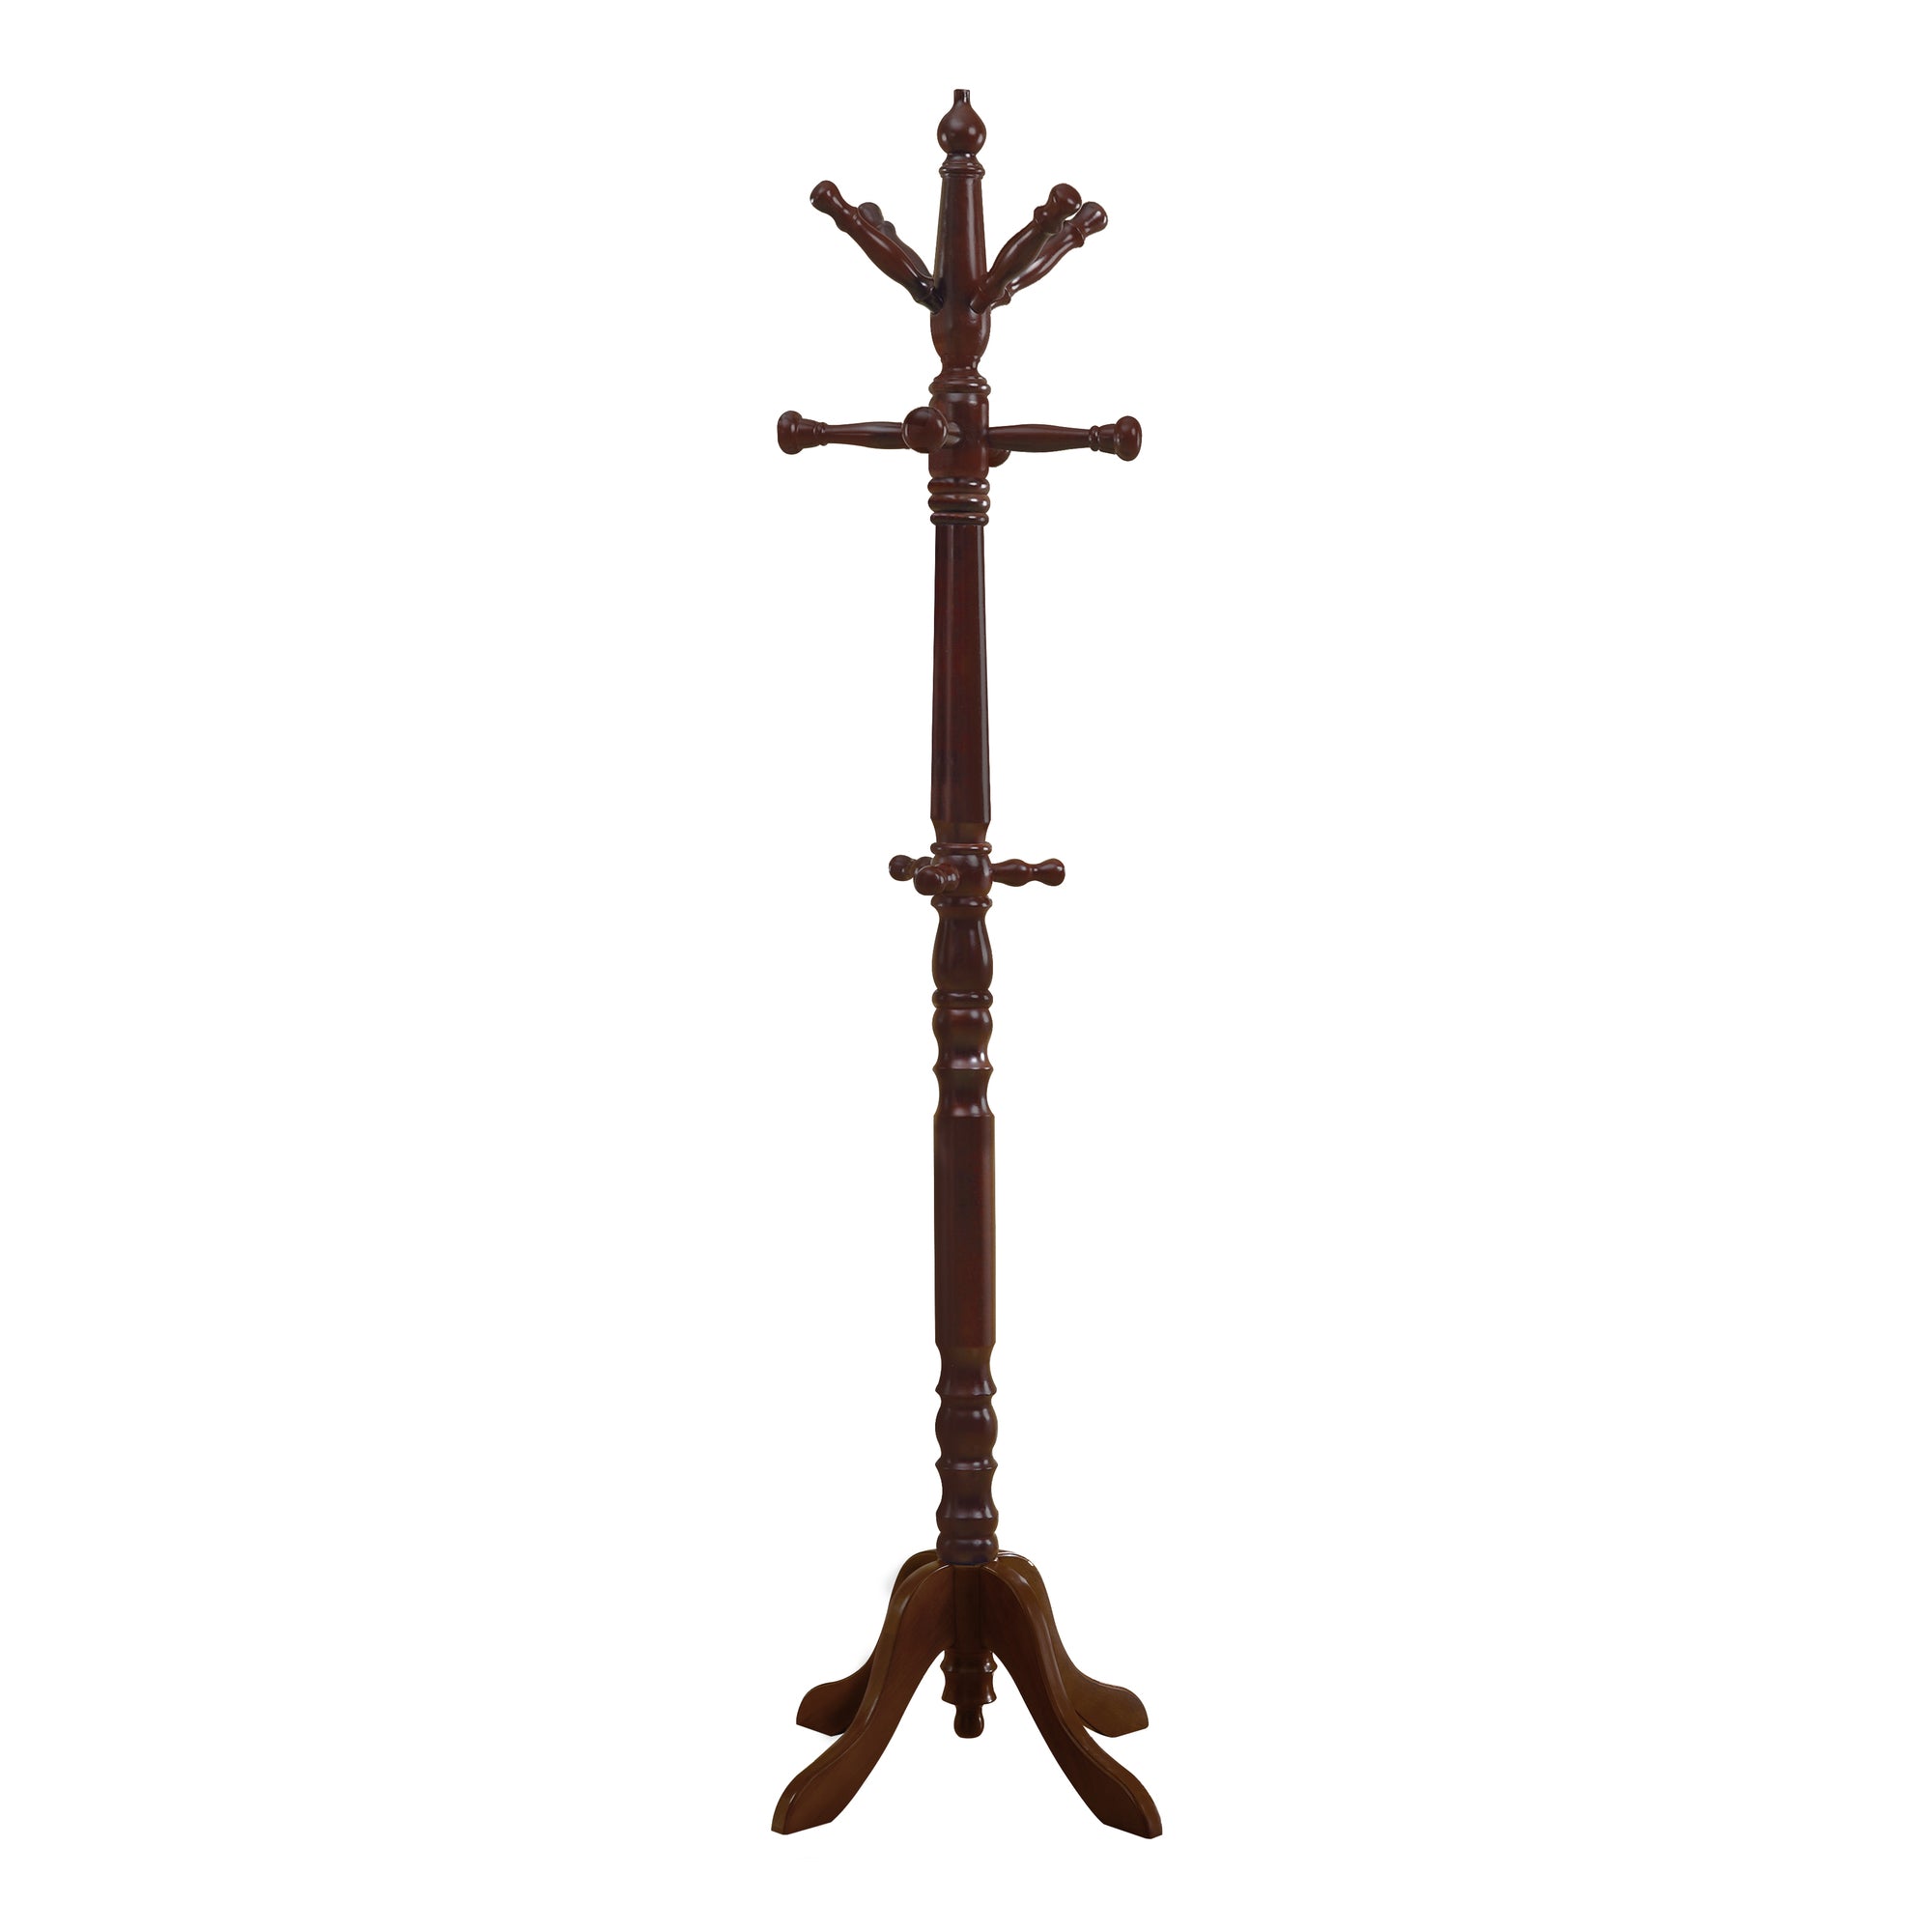 MN-522011    Coat Rack, Hall Tree, Free Standing, 11 Hooks, Entryway, 73"H, Wooden, Cherry, Traditional